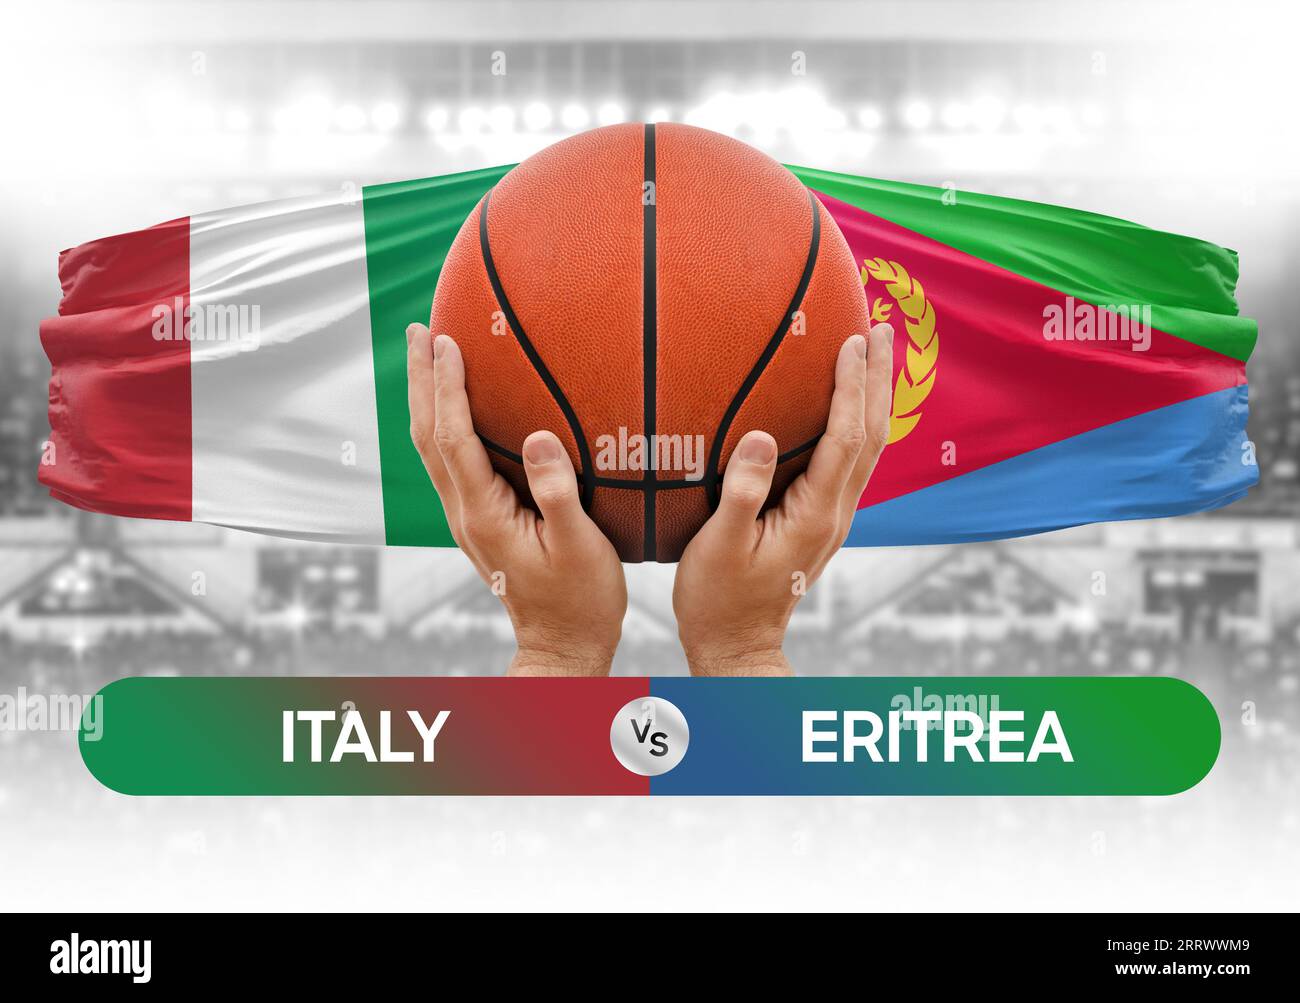 Italy vs Eritrea national basketball teams basket ball match competition cup concept image Stock Photo